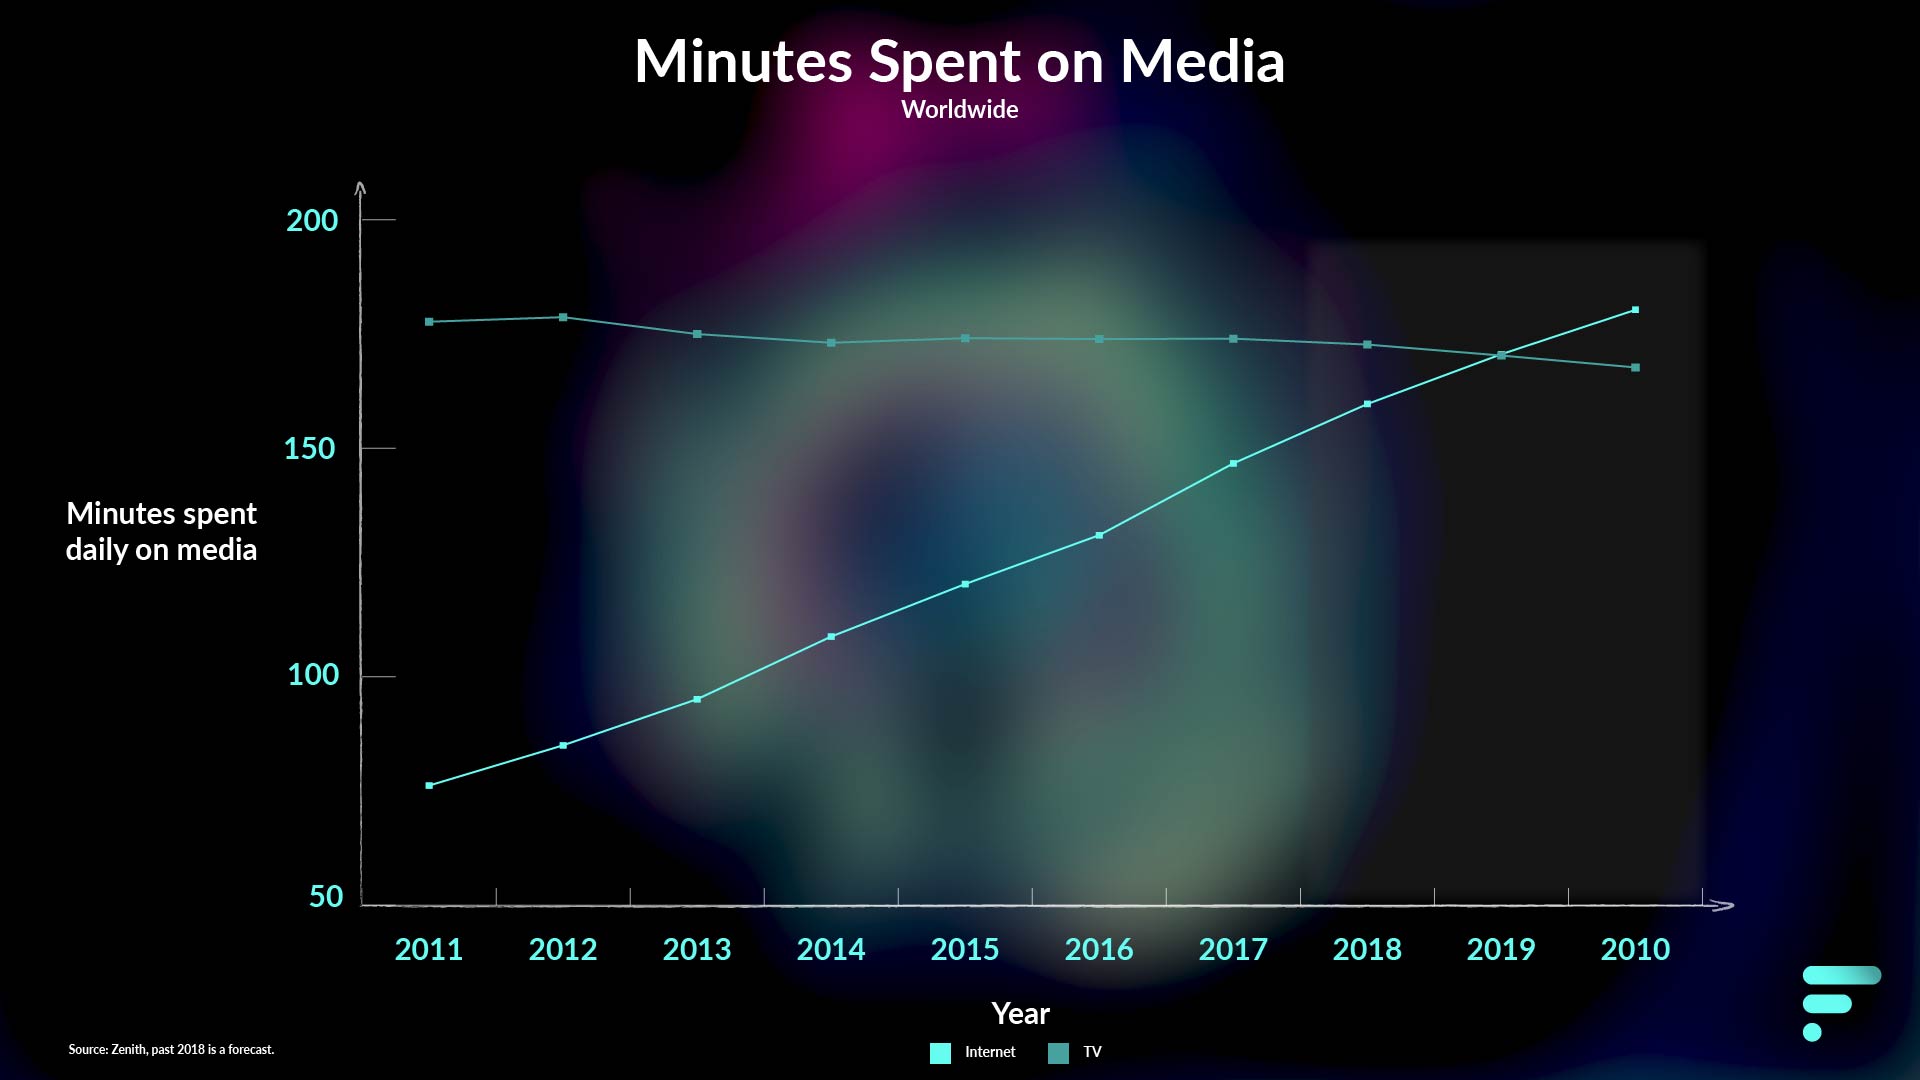 Minutes spent on media is overtaking TV by 2019